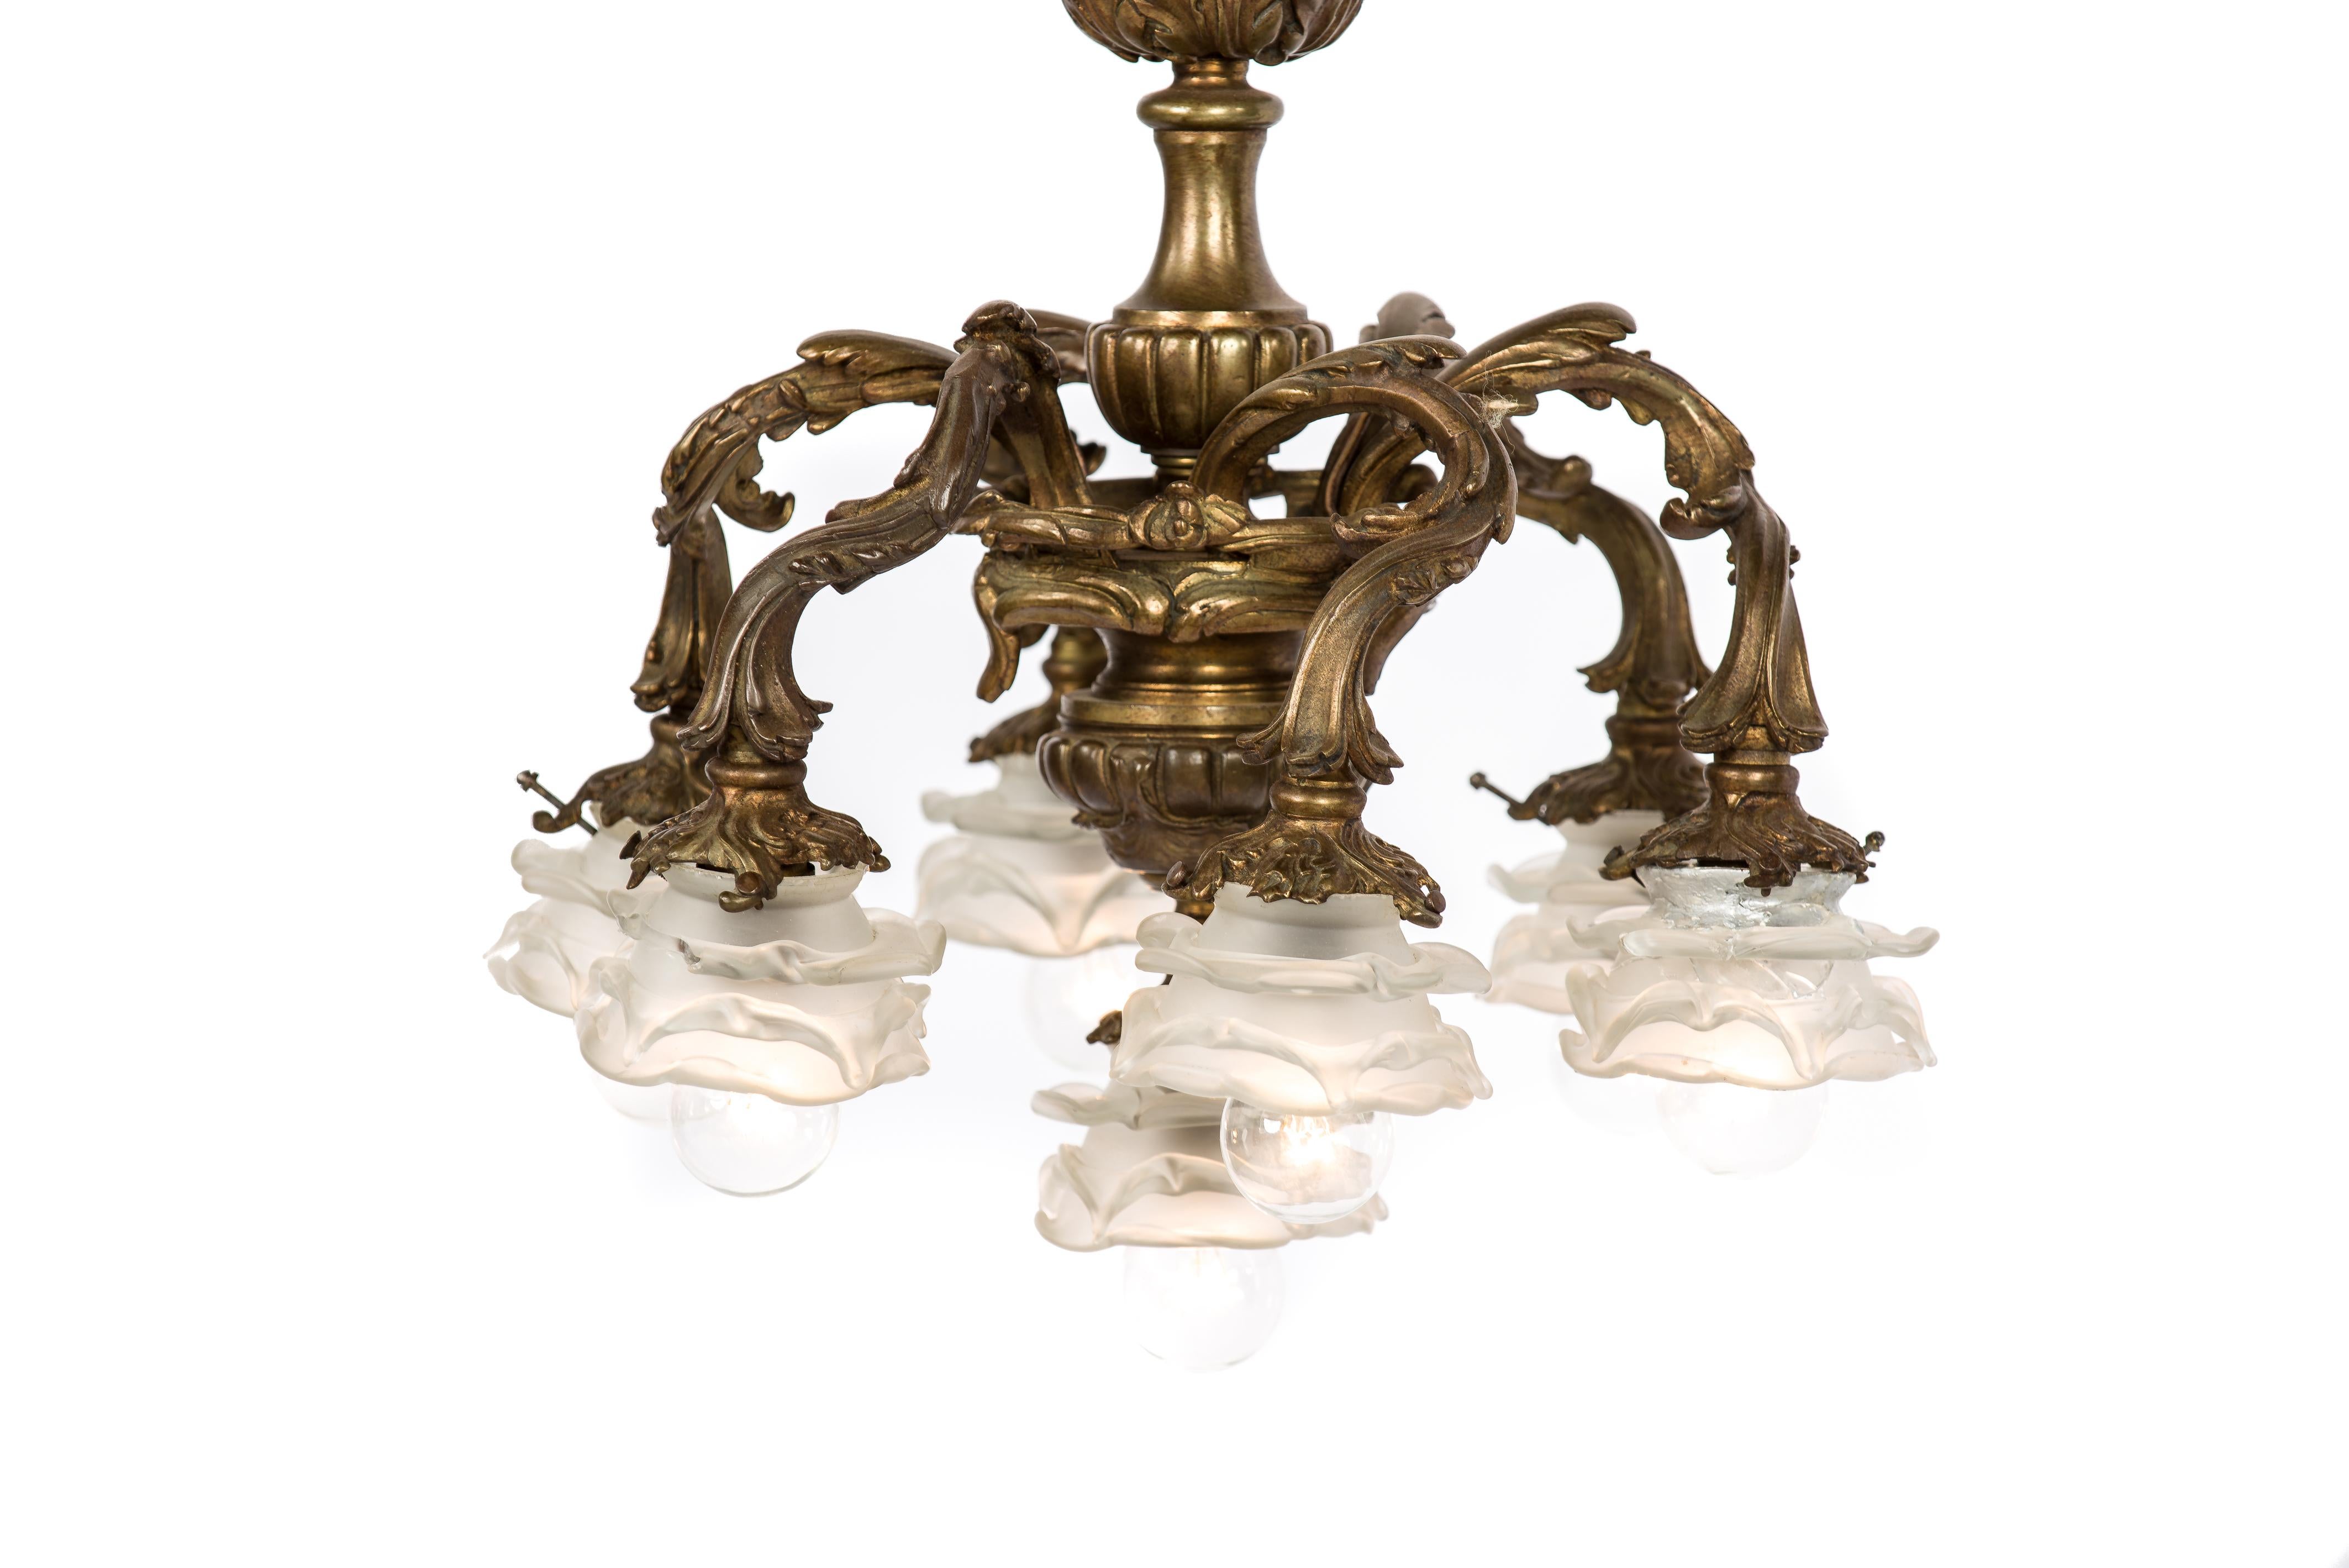 Patinated Antique 19th-Century French Brass Rococo or Louis XV Chandelier with 7 Lights For Sale